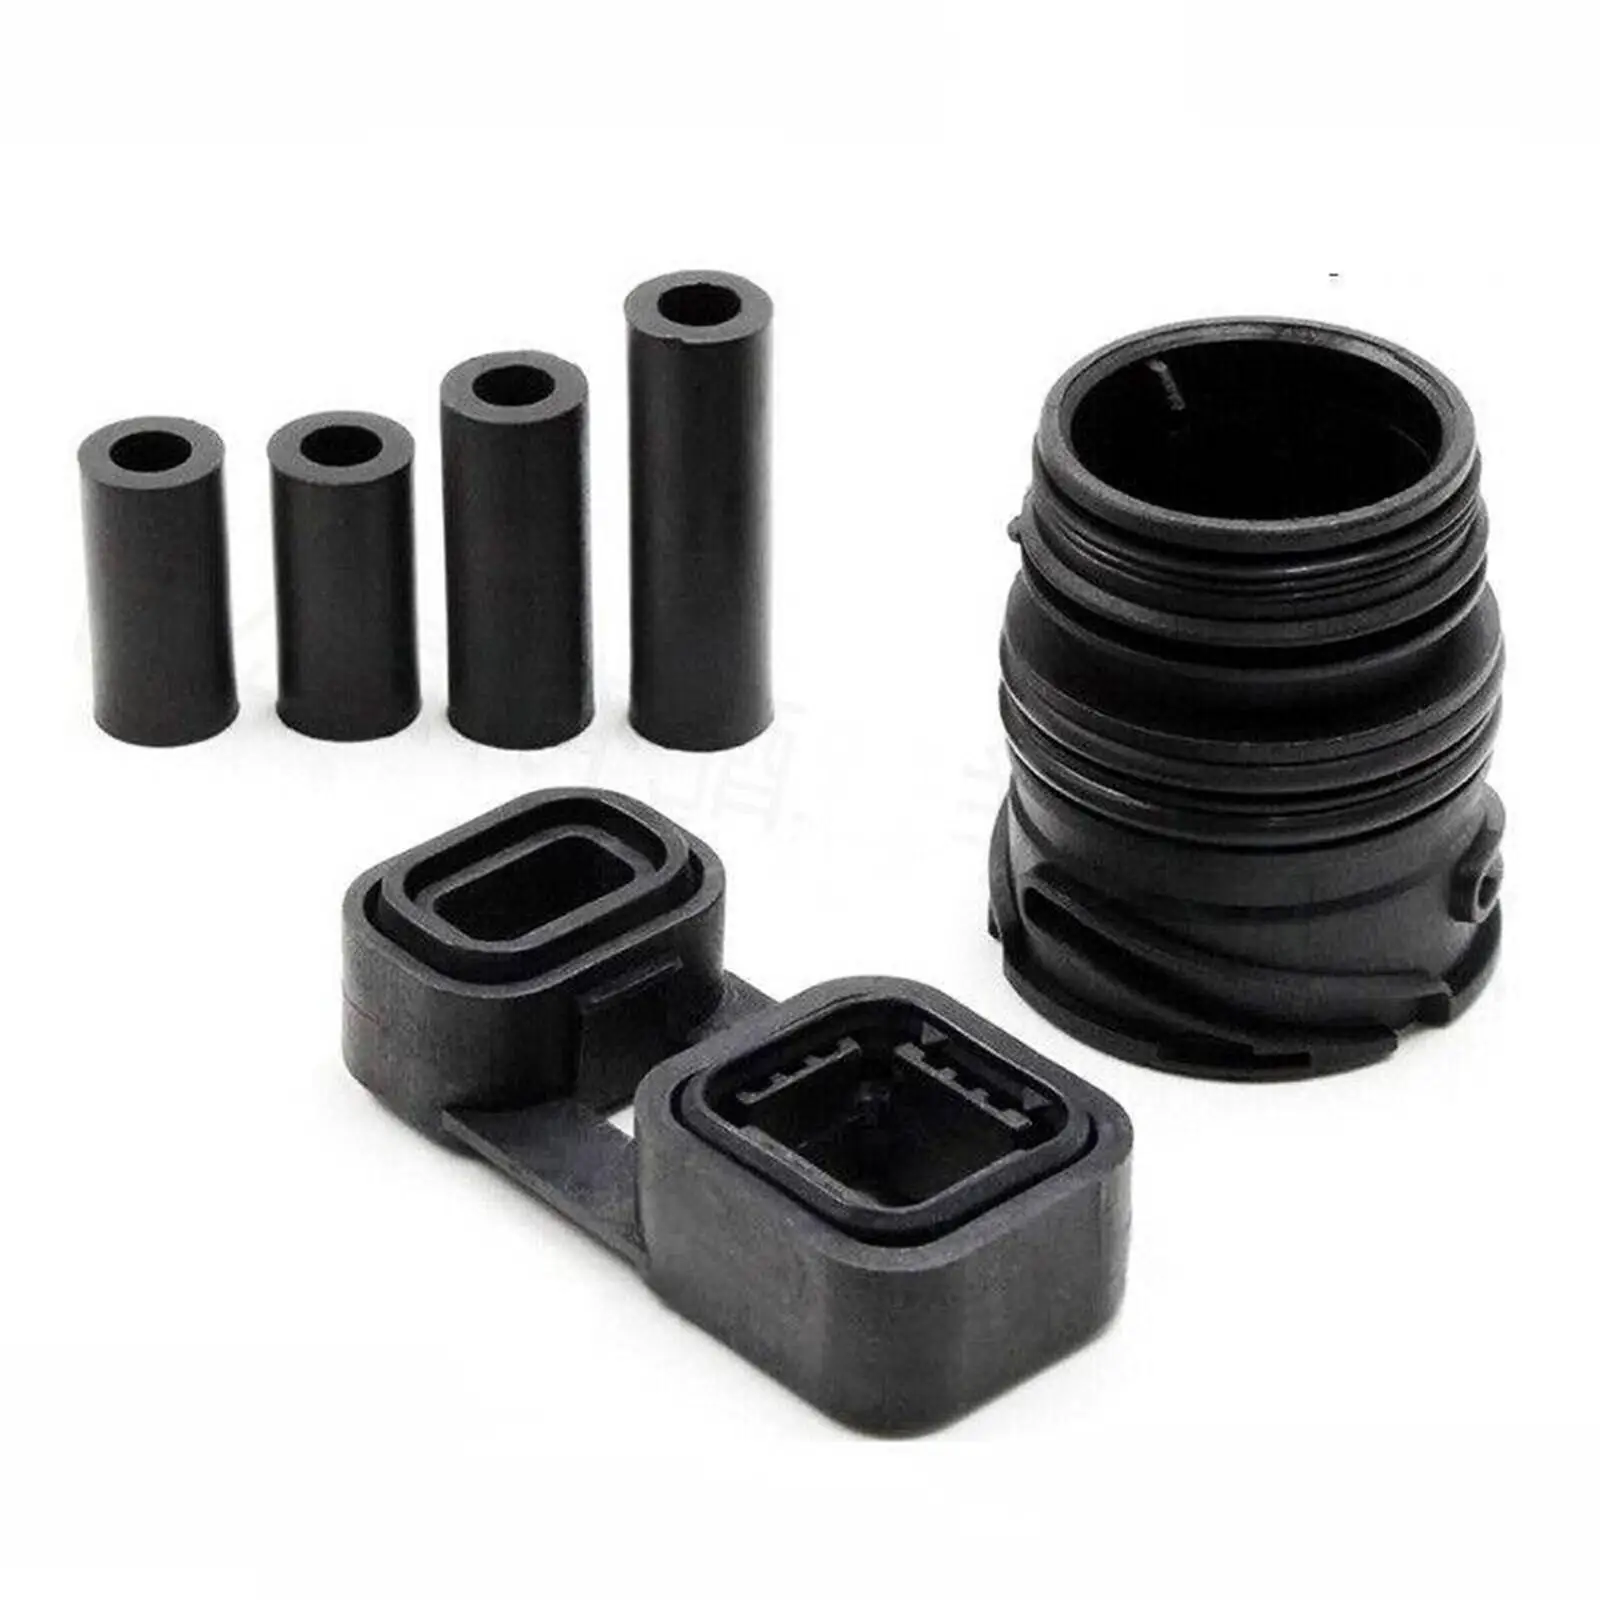 Sleeve and Adapter Seal Kit Replaces Rubber Durable for BMW 1 Series 3 Series 5